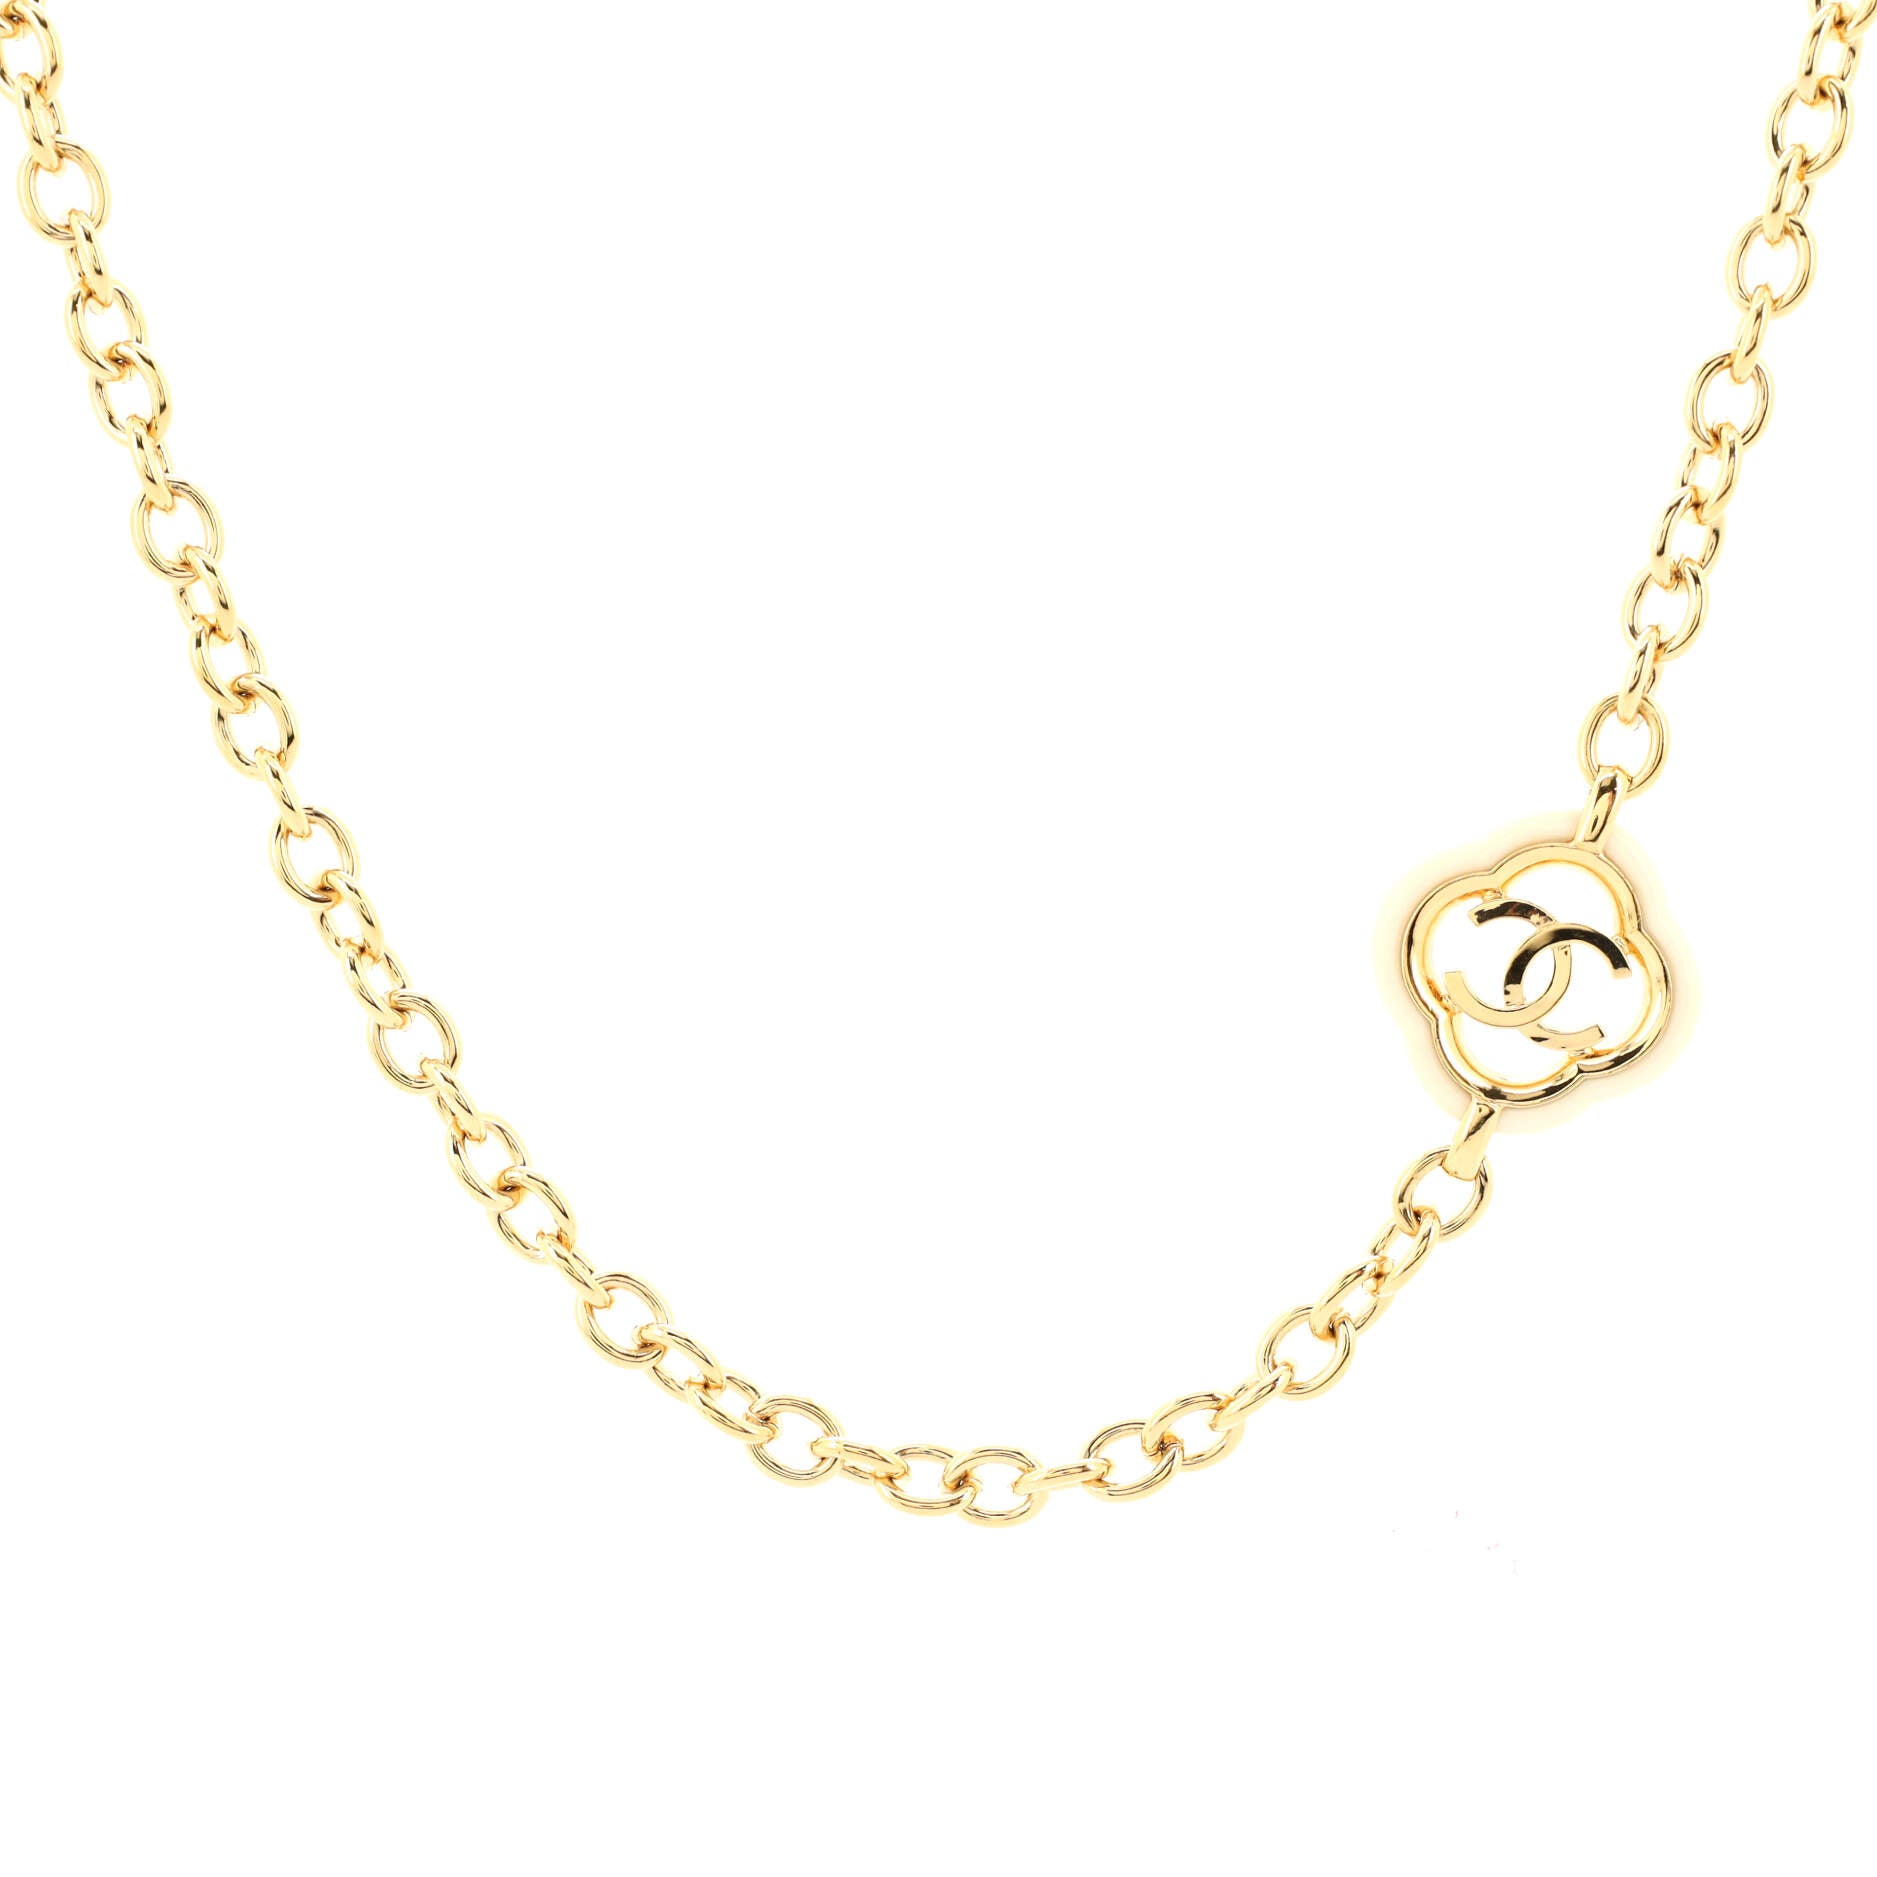 Chanel Resin Clover Pendant Necklace